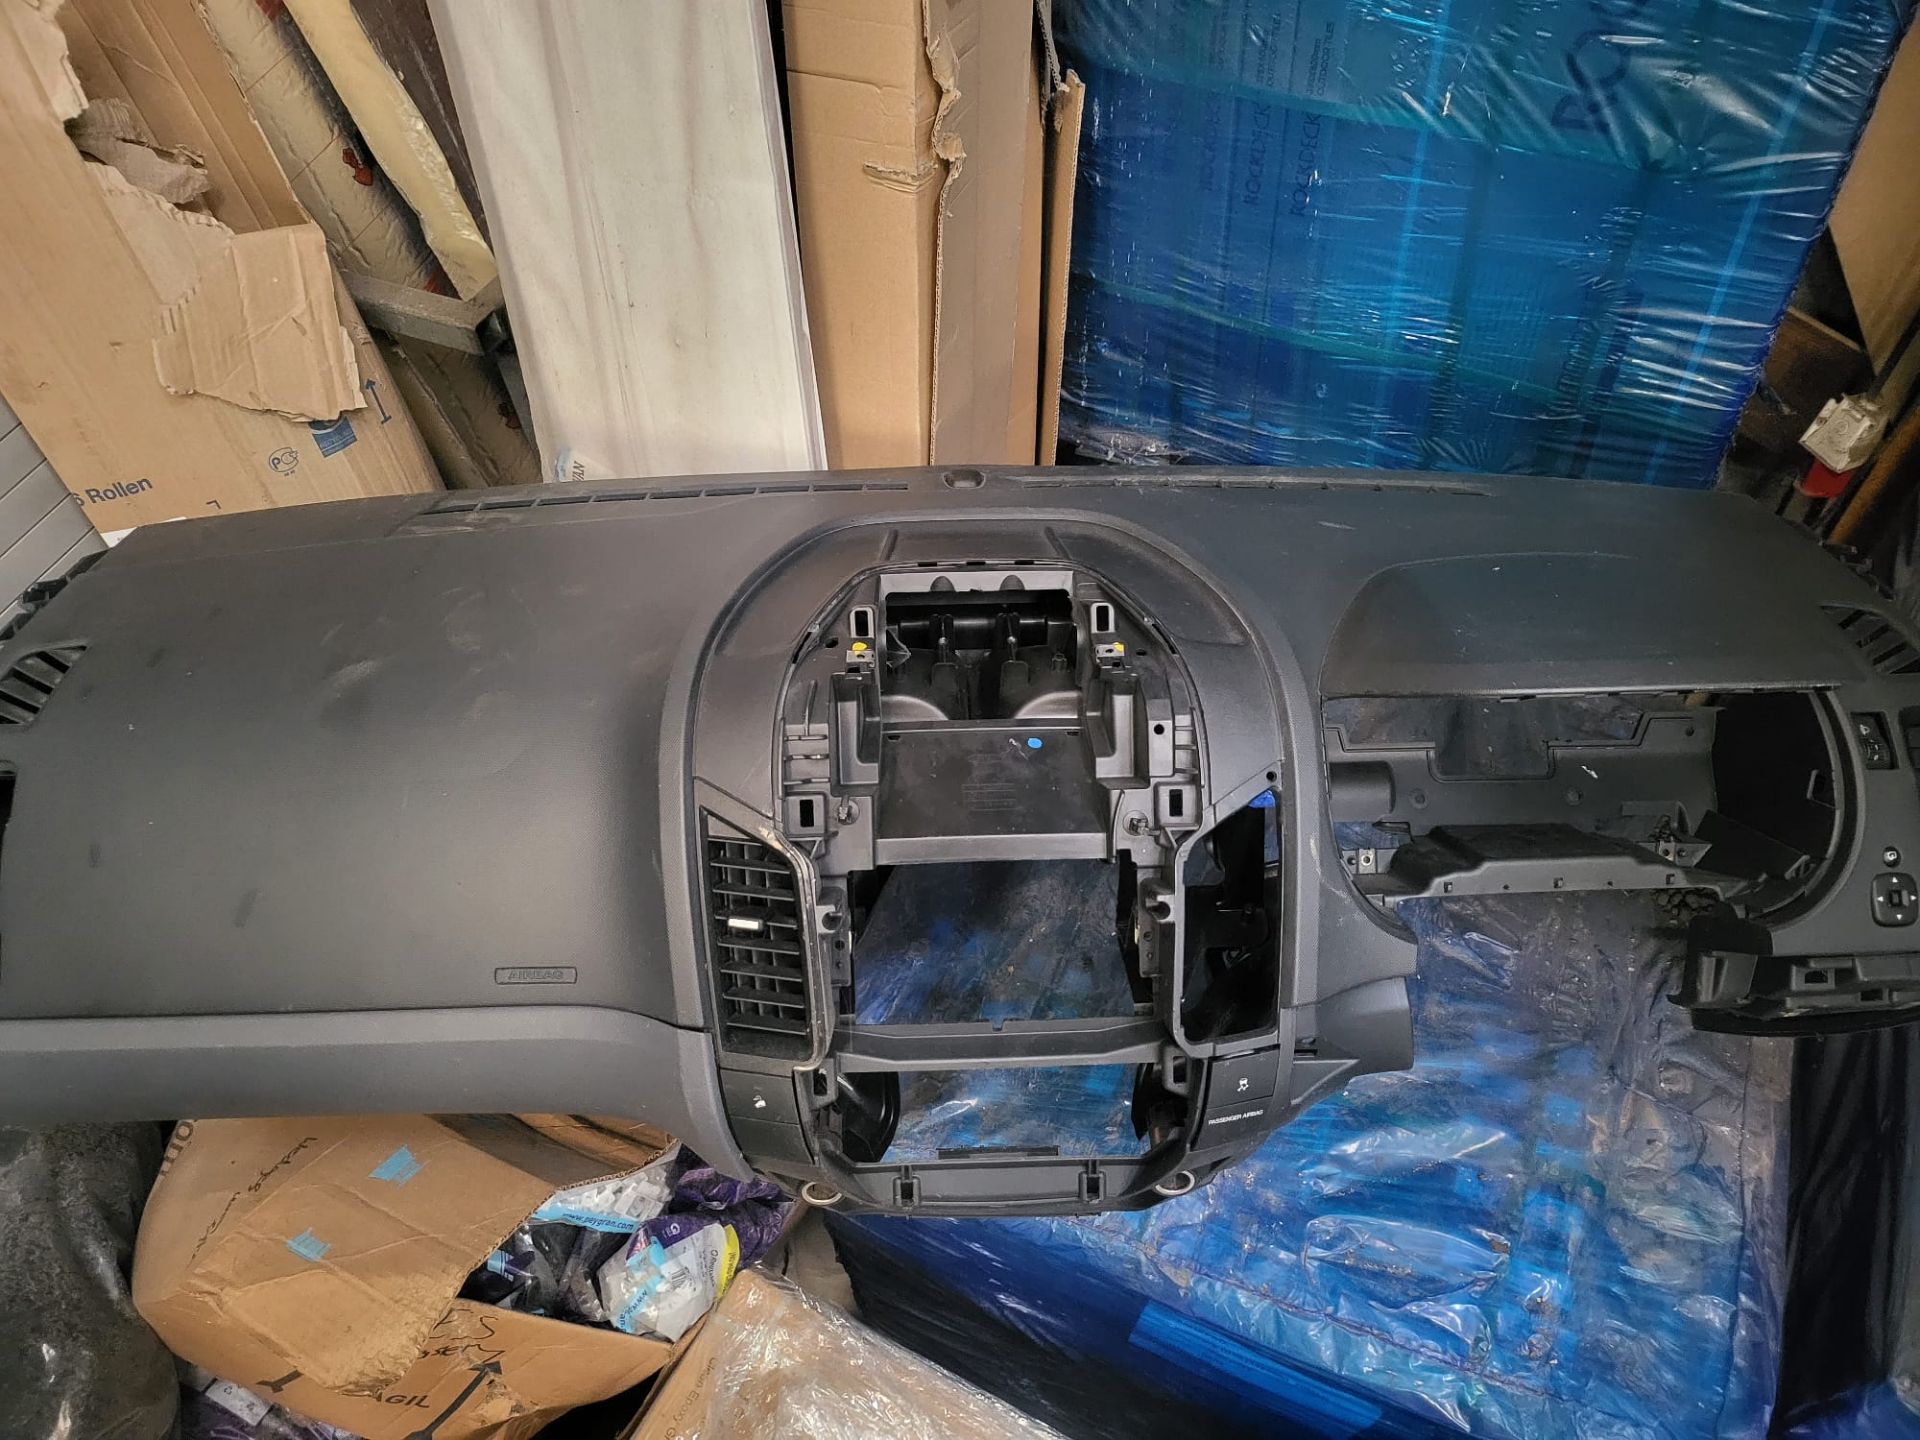 Ford Ranger 2015 Dash Board with Airbags - Image 4 of 4